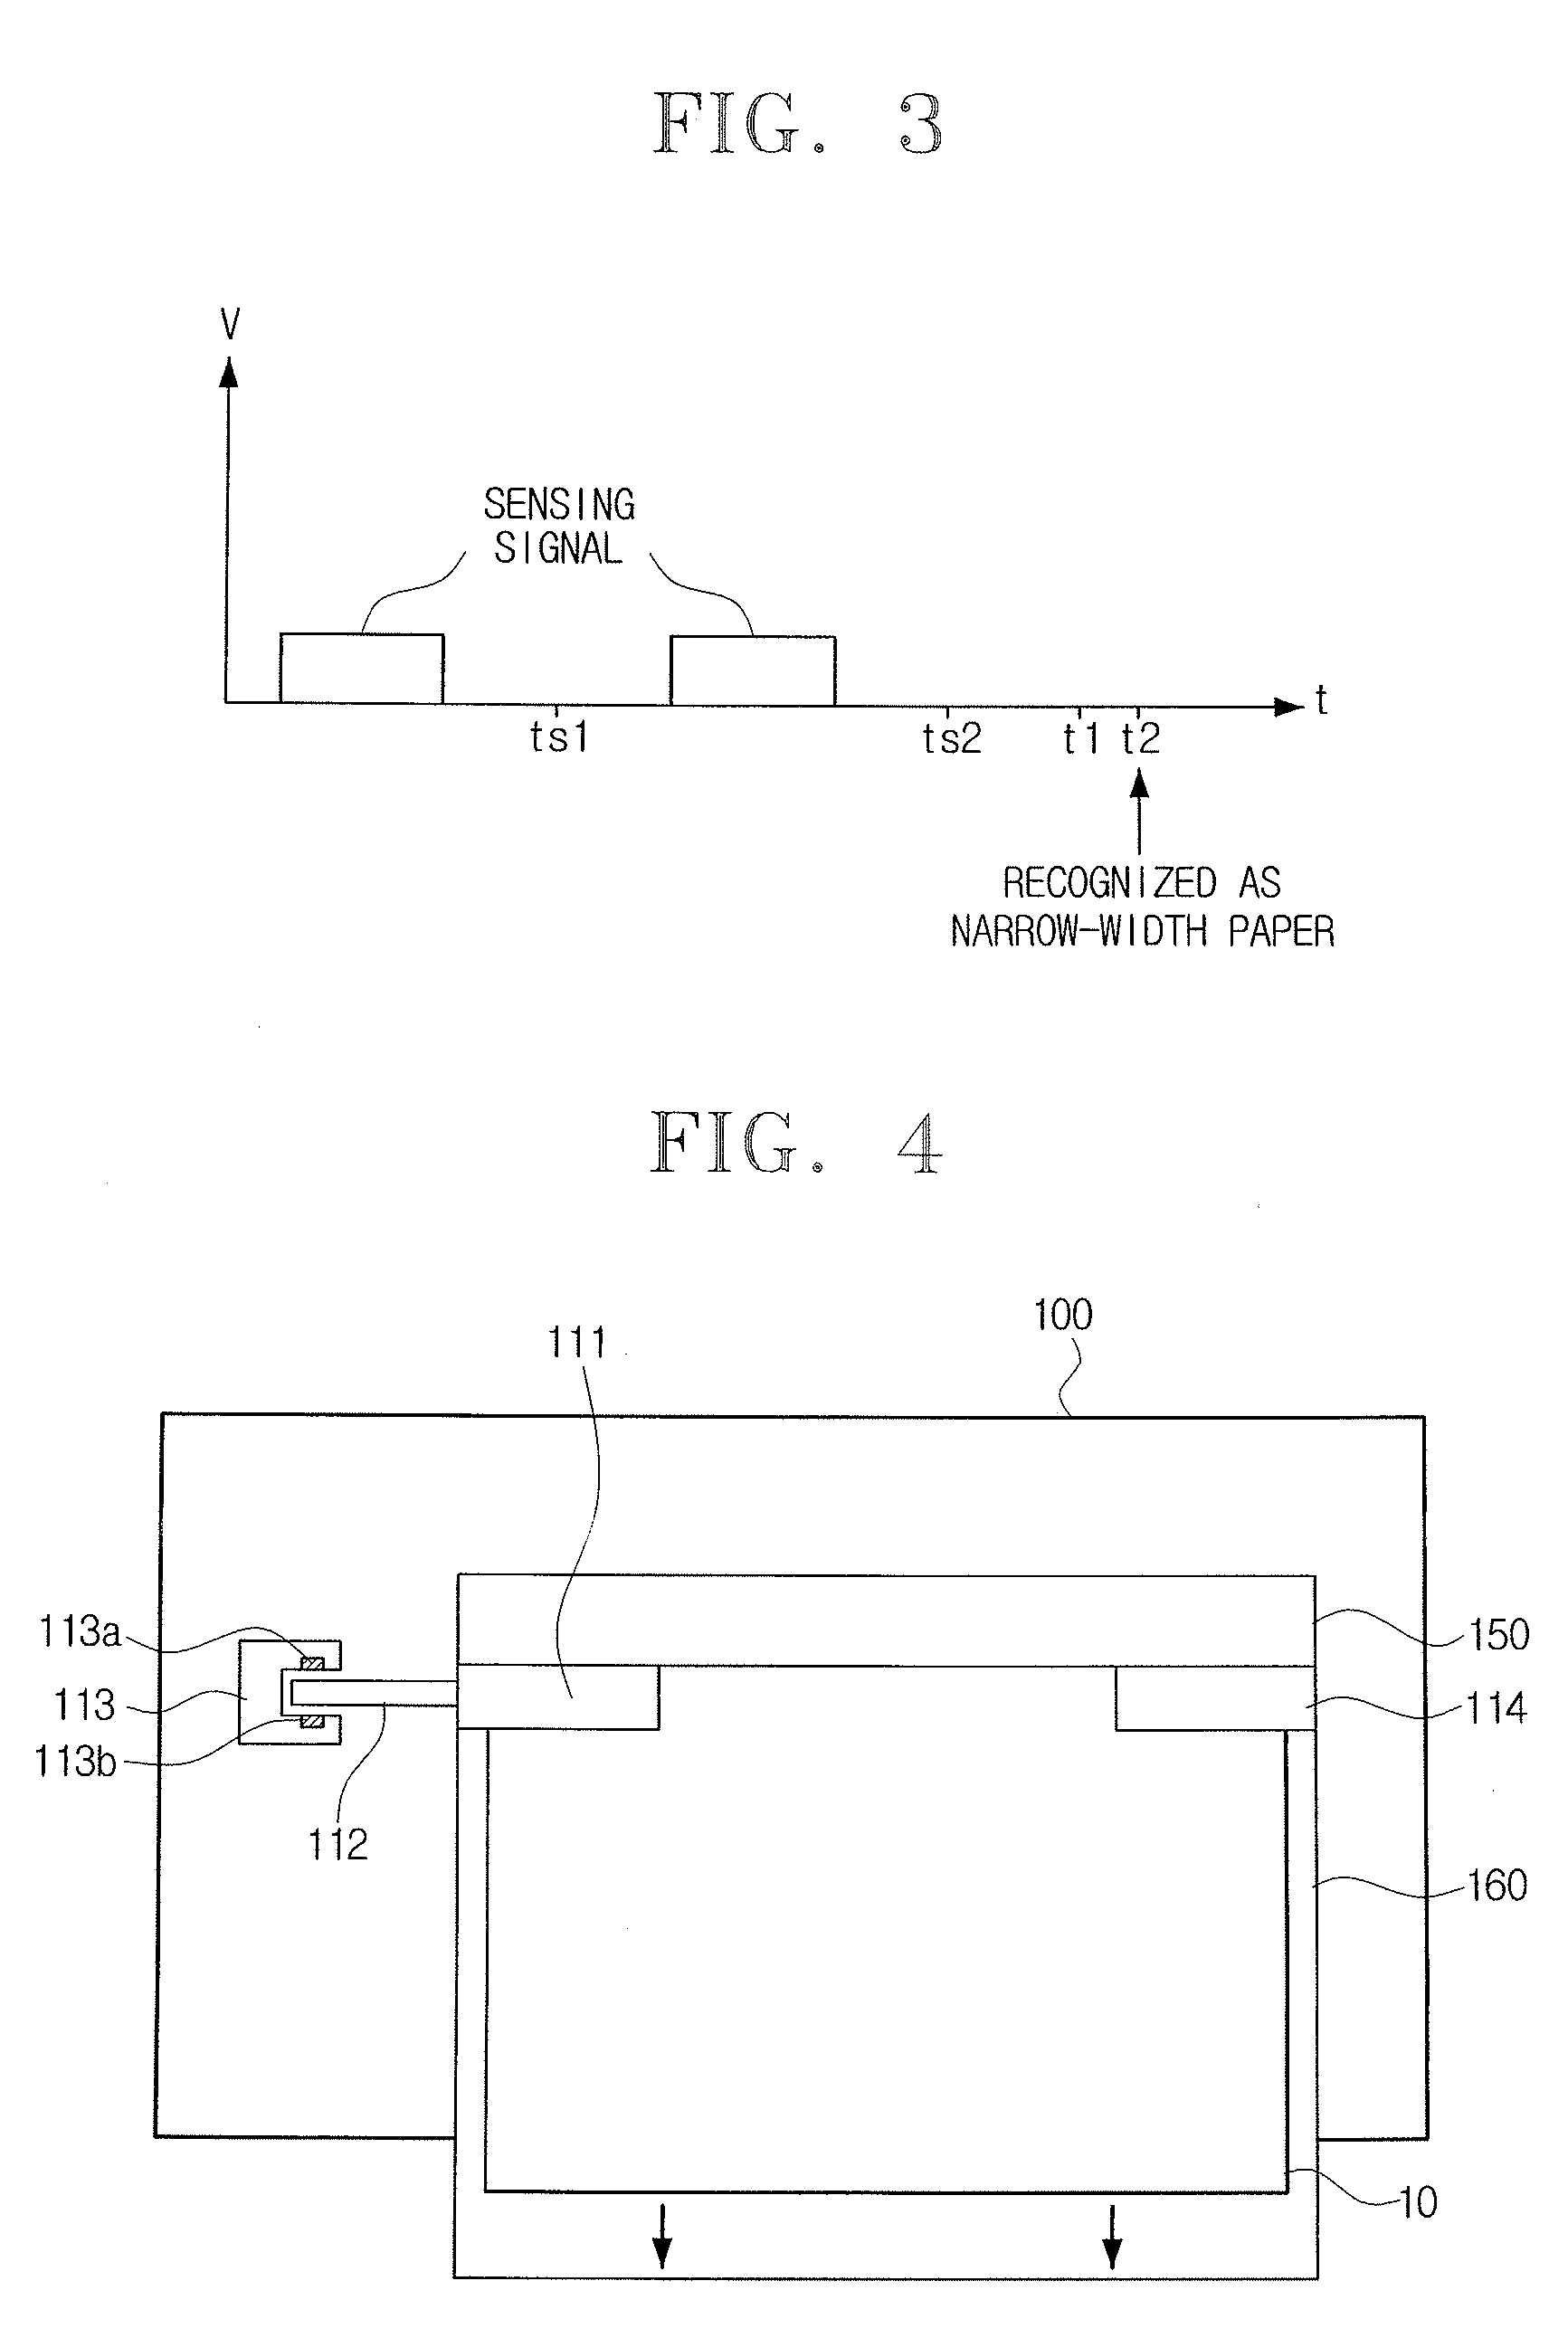 Image forming device to determine paper width and image forming method thereof